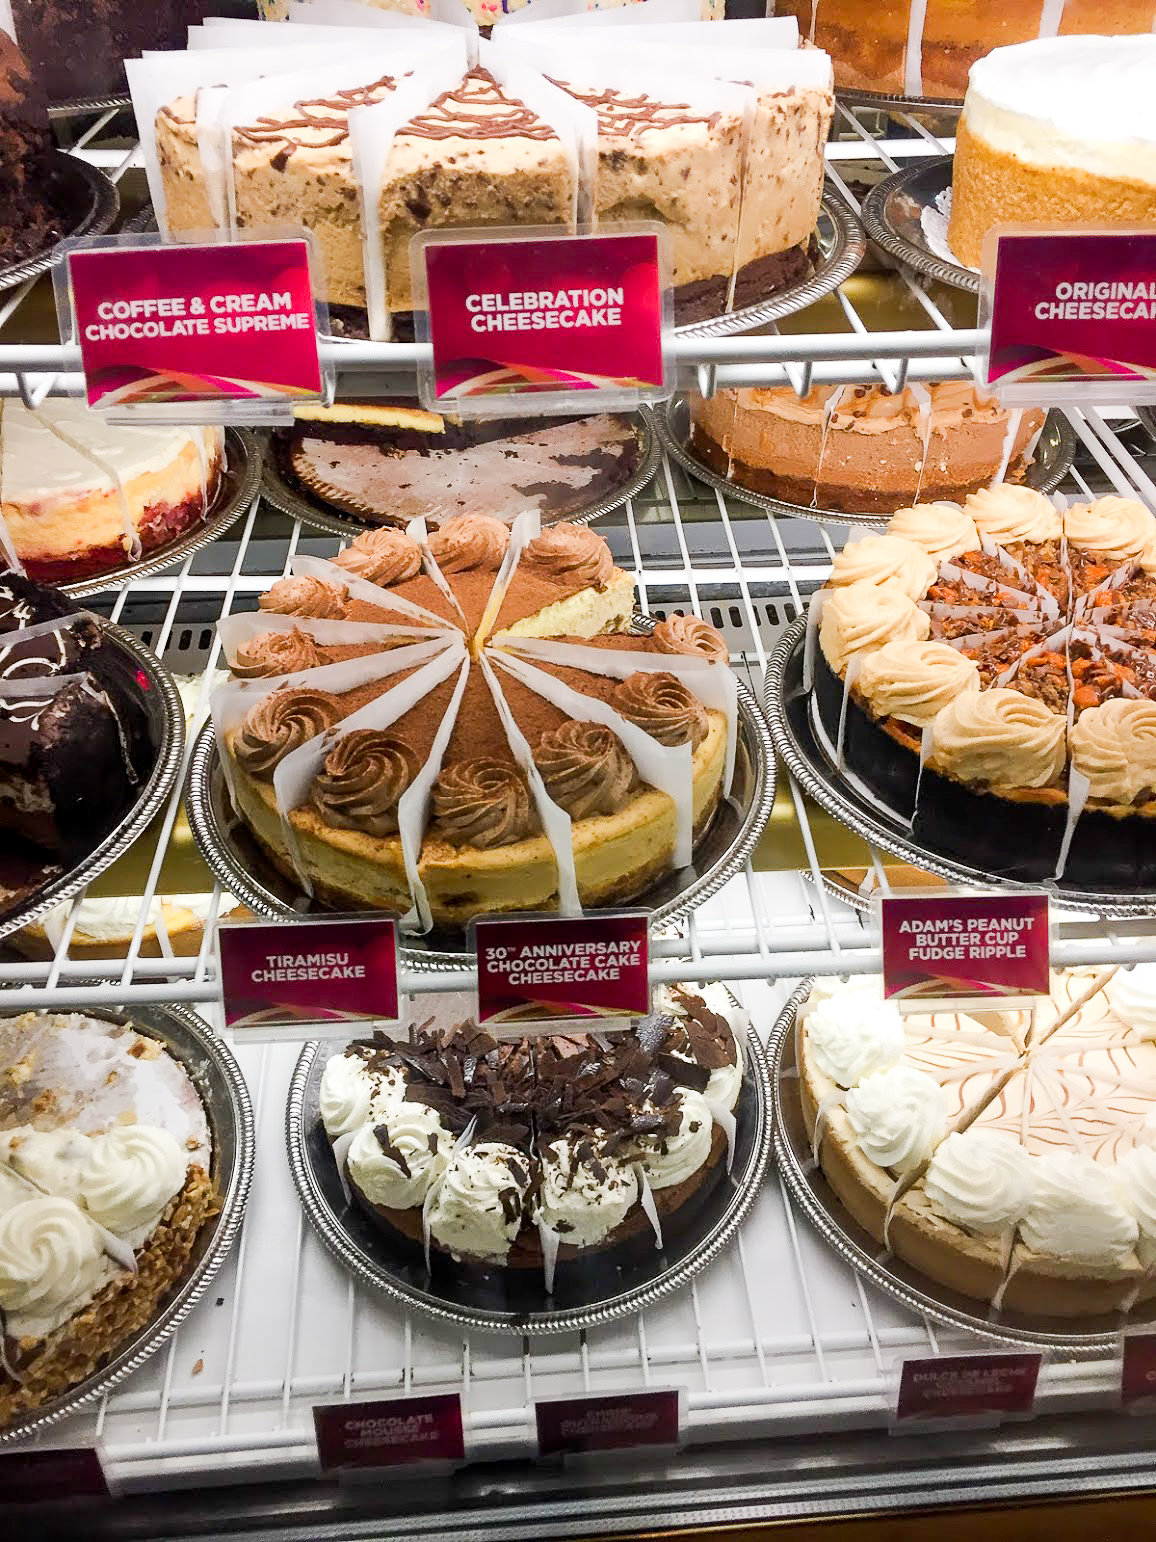 Best cheesecakes in cheesecake factory